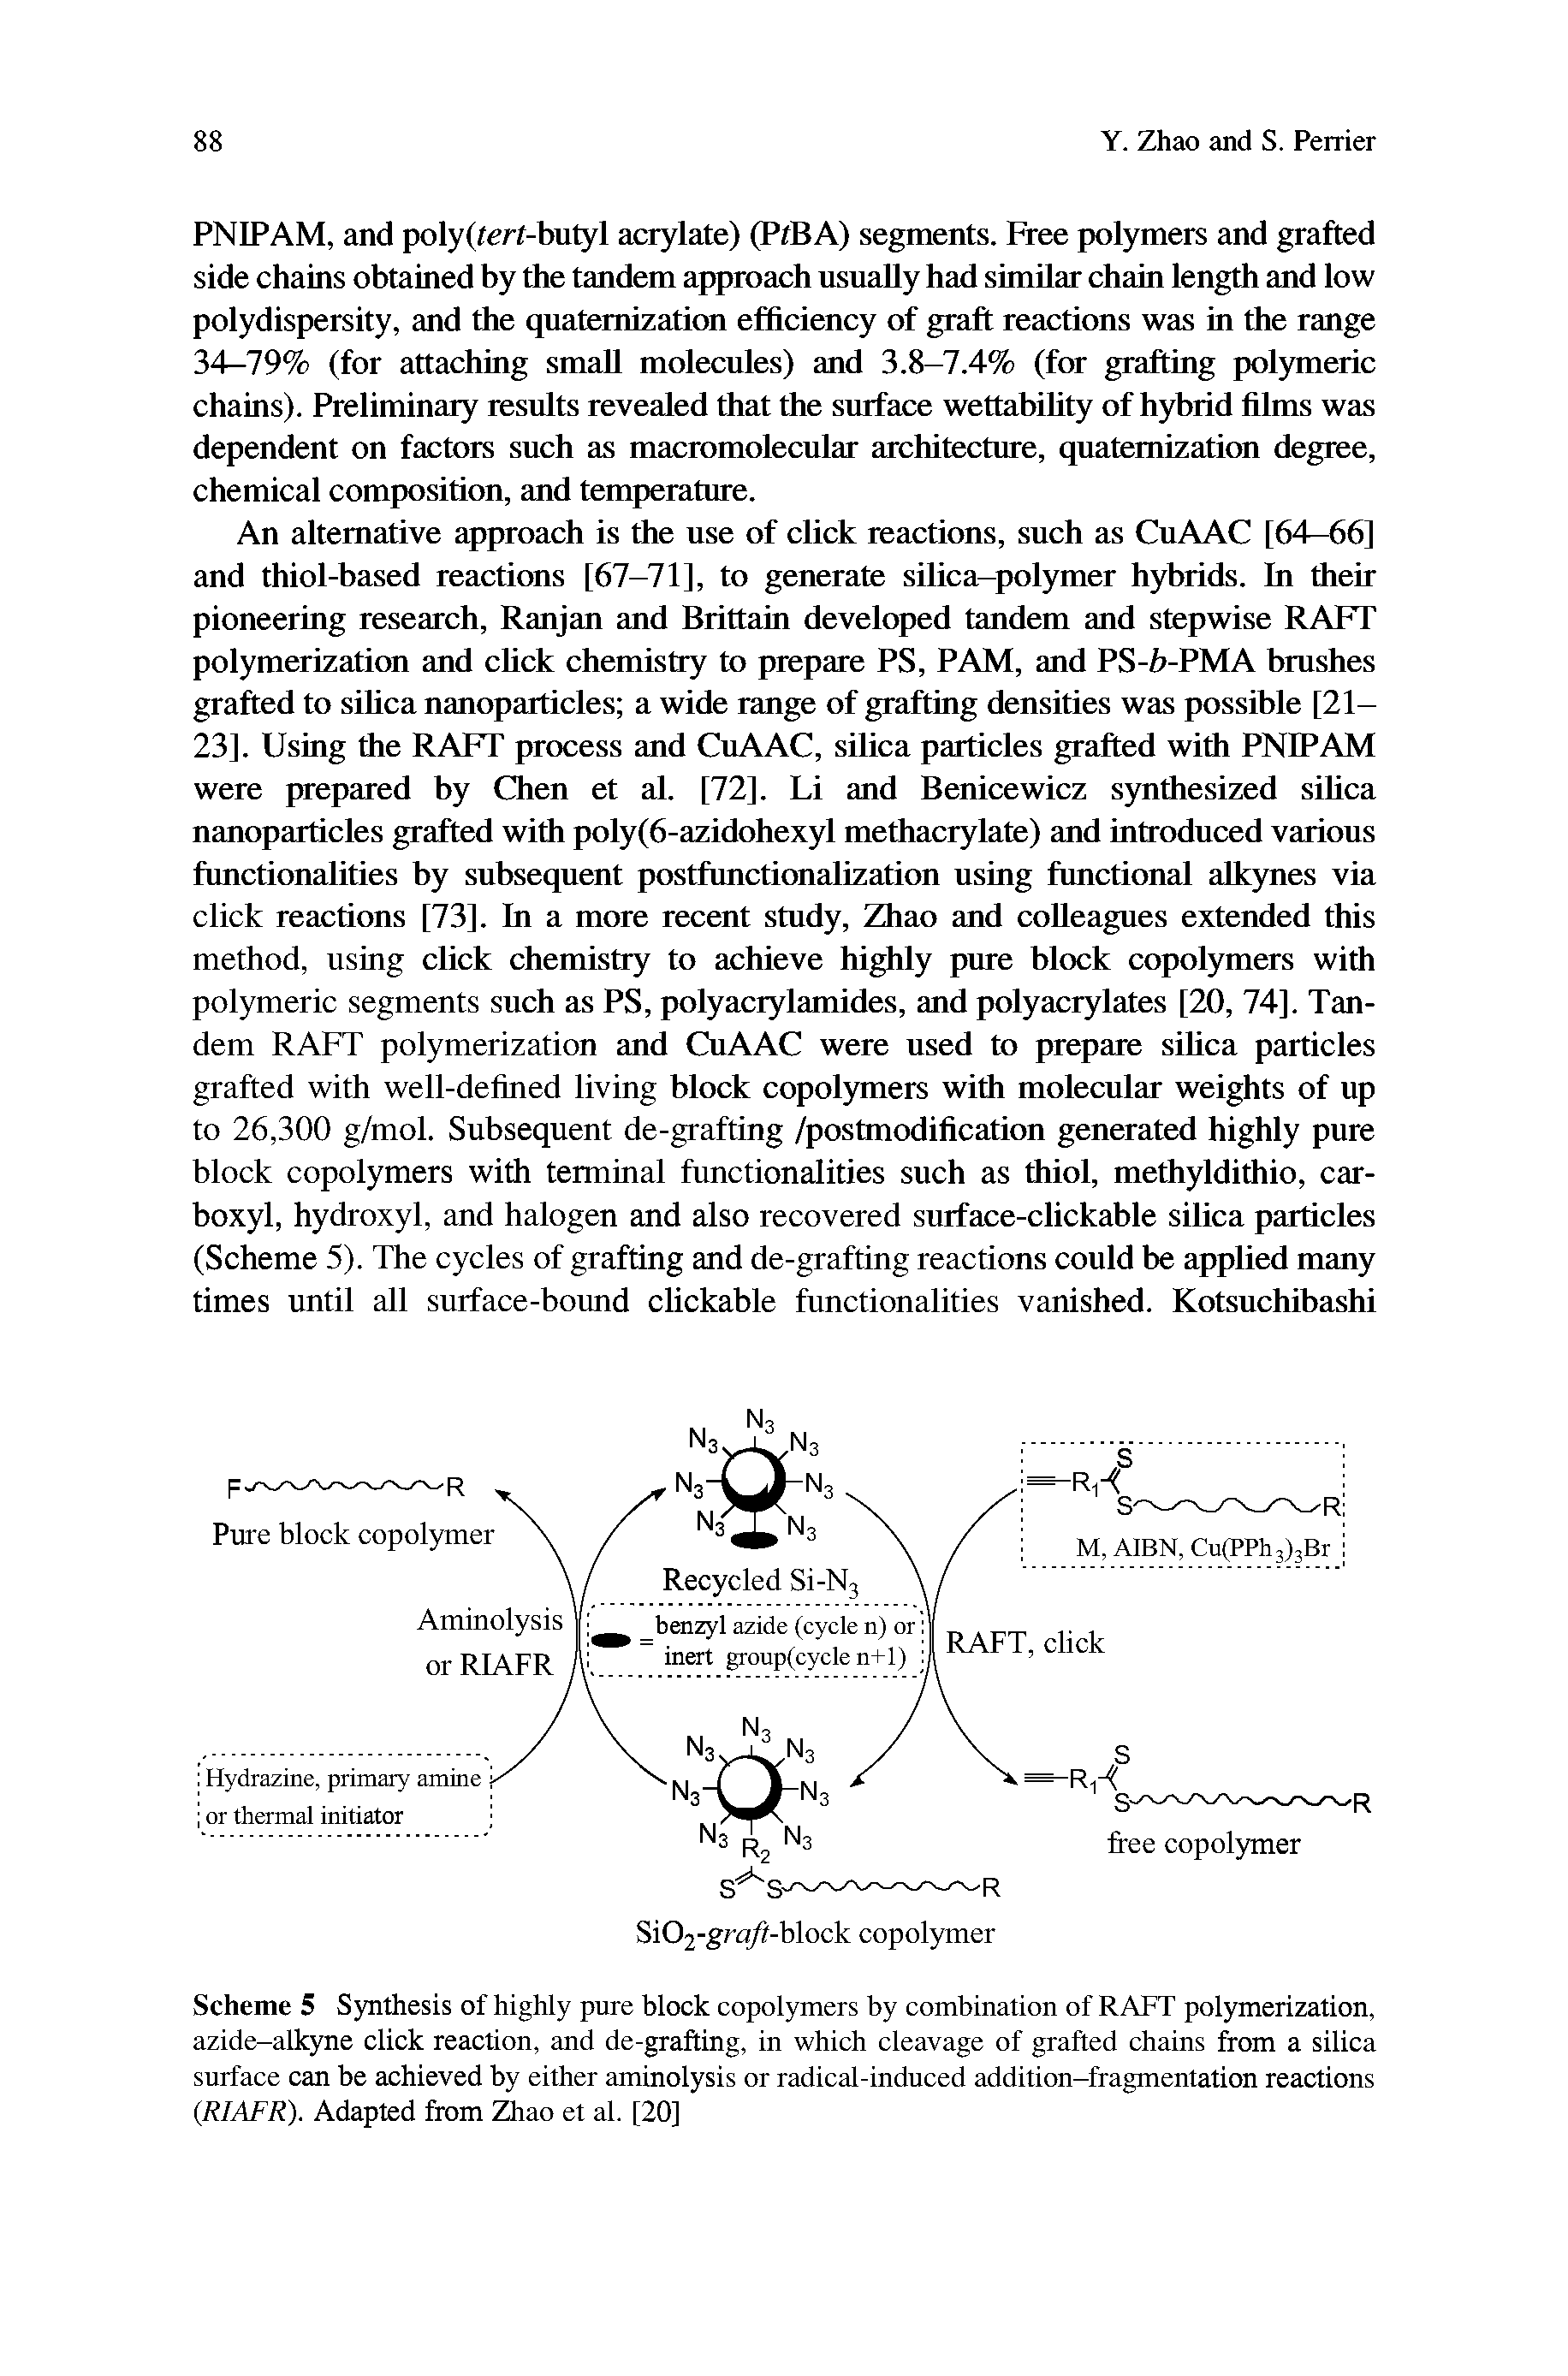 Scheme 5 Synthesis of highly pure block copolymers by combination of RAFT polymerization, azide-alkyne click reaction, and de-grafting, in which cleavage of grafted chains from a silica surface can be achieved by either aminolysis or radical-induced addition-fragmentation reactions (RIAFR). Adapted from Zhao et al. [20]...